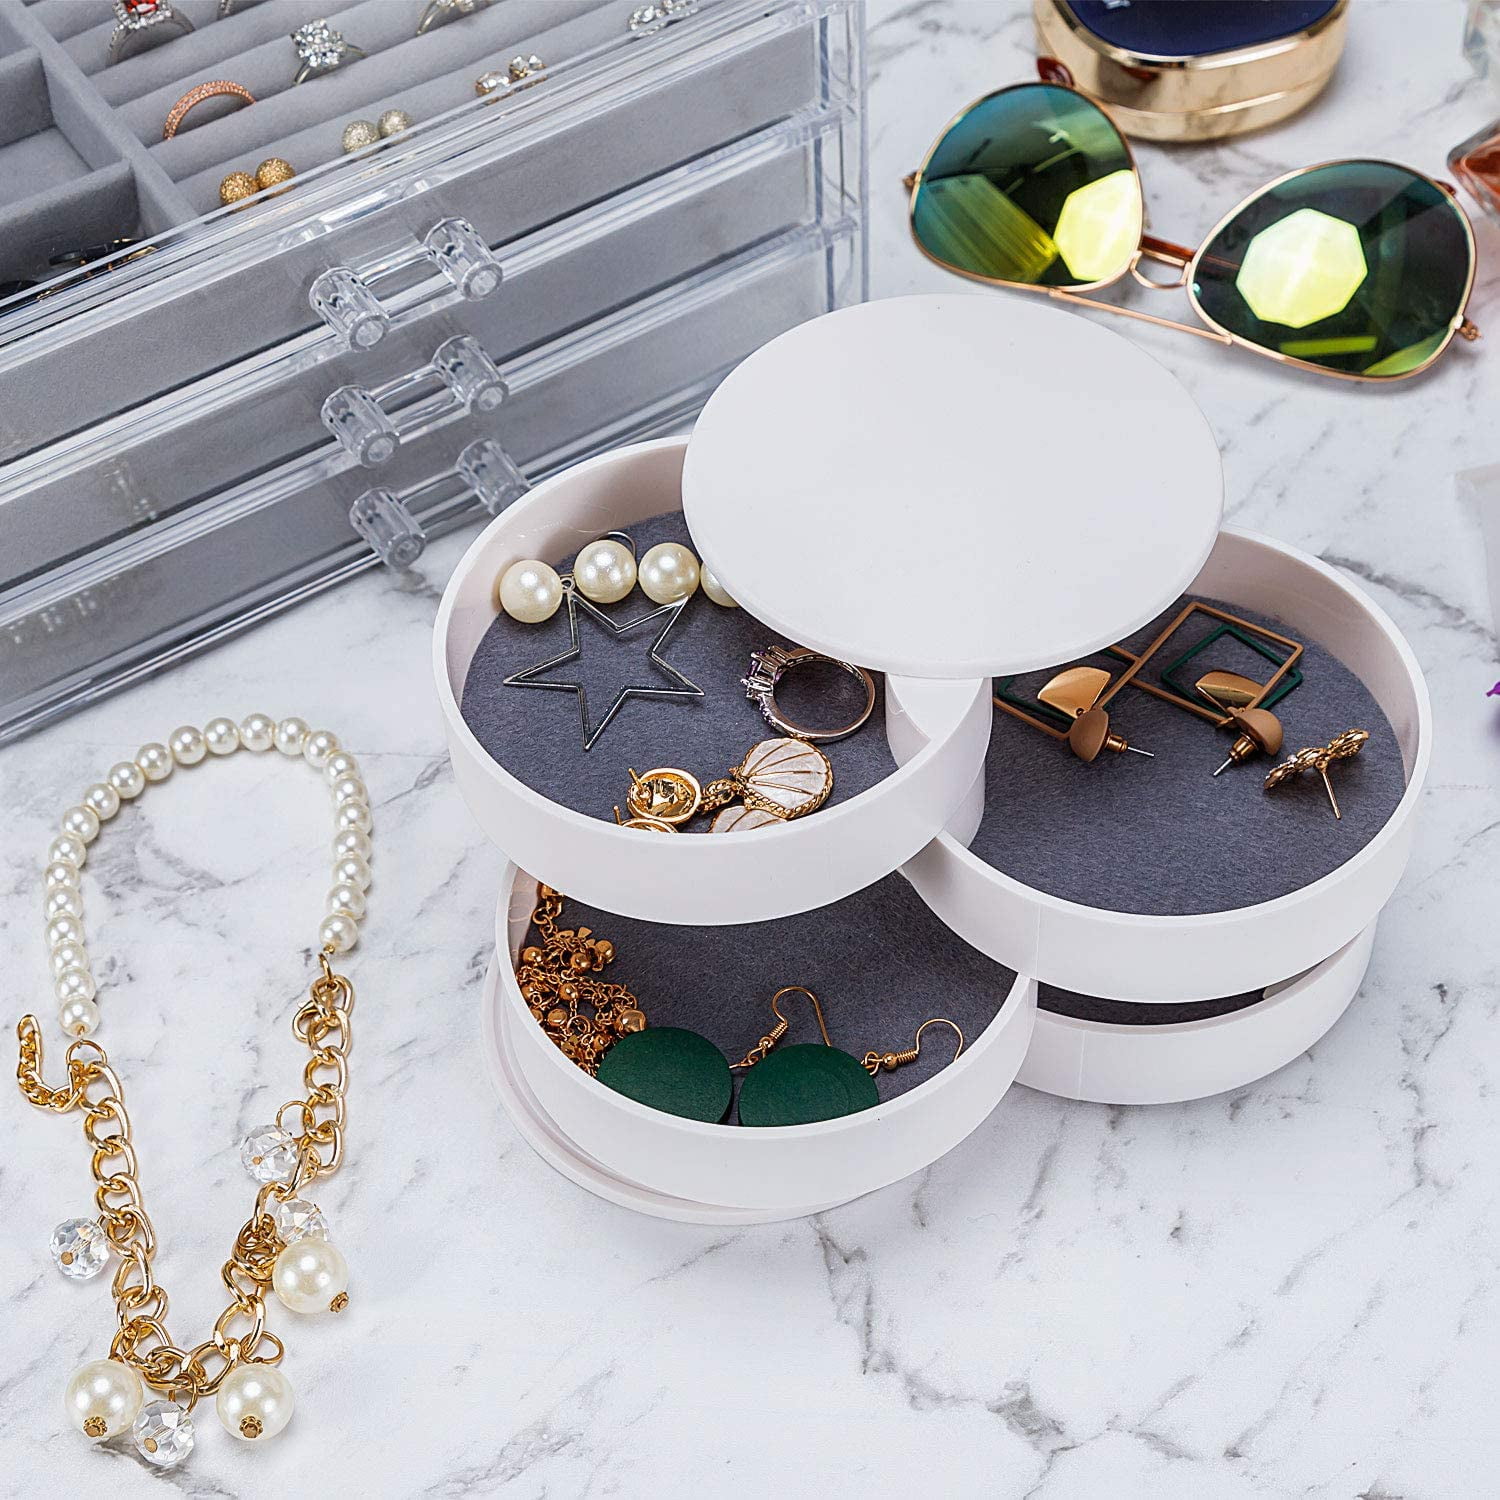 Multi Tier Necklace Earring Ring Bracelets Watches Stand Organizer Jewelry Display Stand Home Office Makeup Practical Wooden Jewelry Stand Organizer Best Gift for Women Girl lady Jewelry Stand Holder 